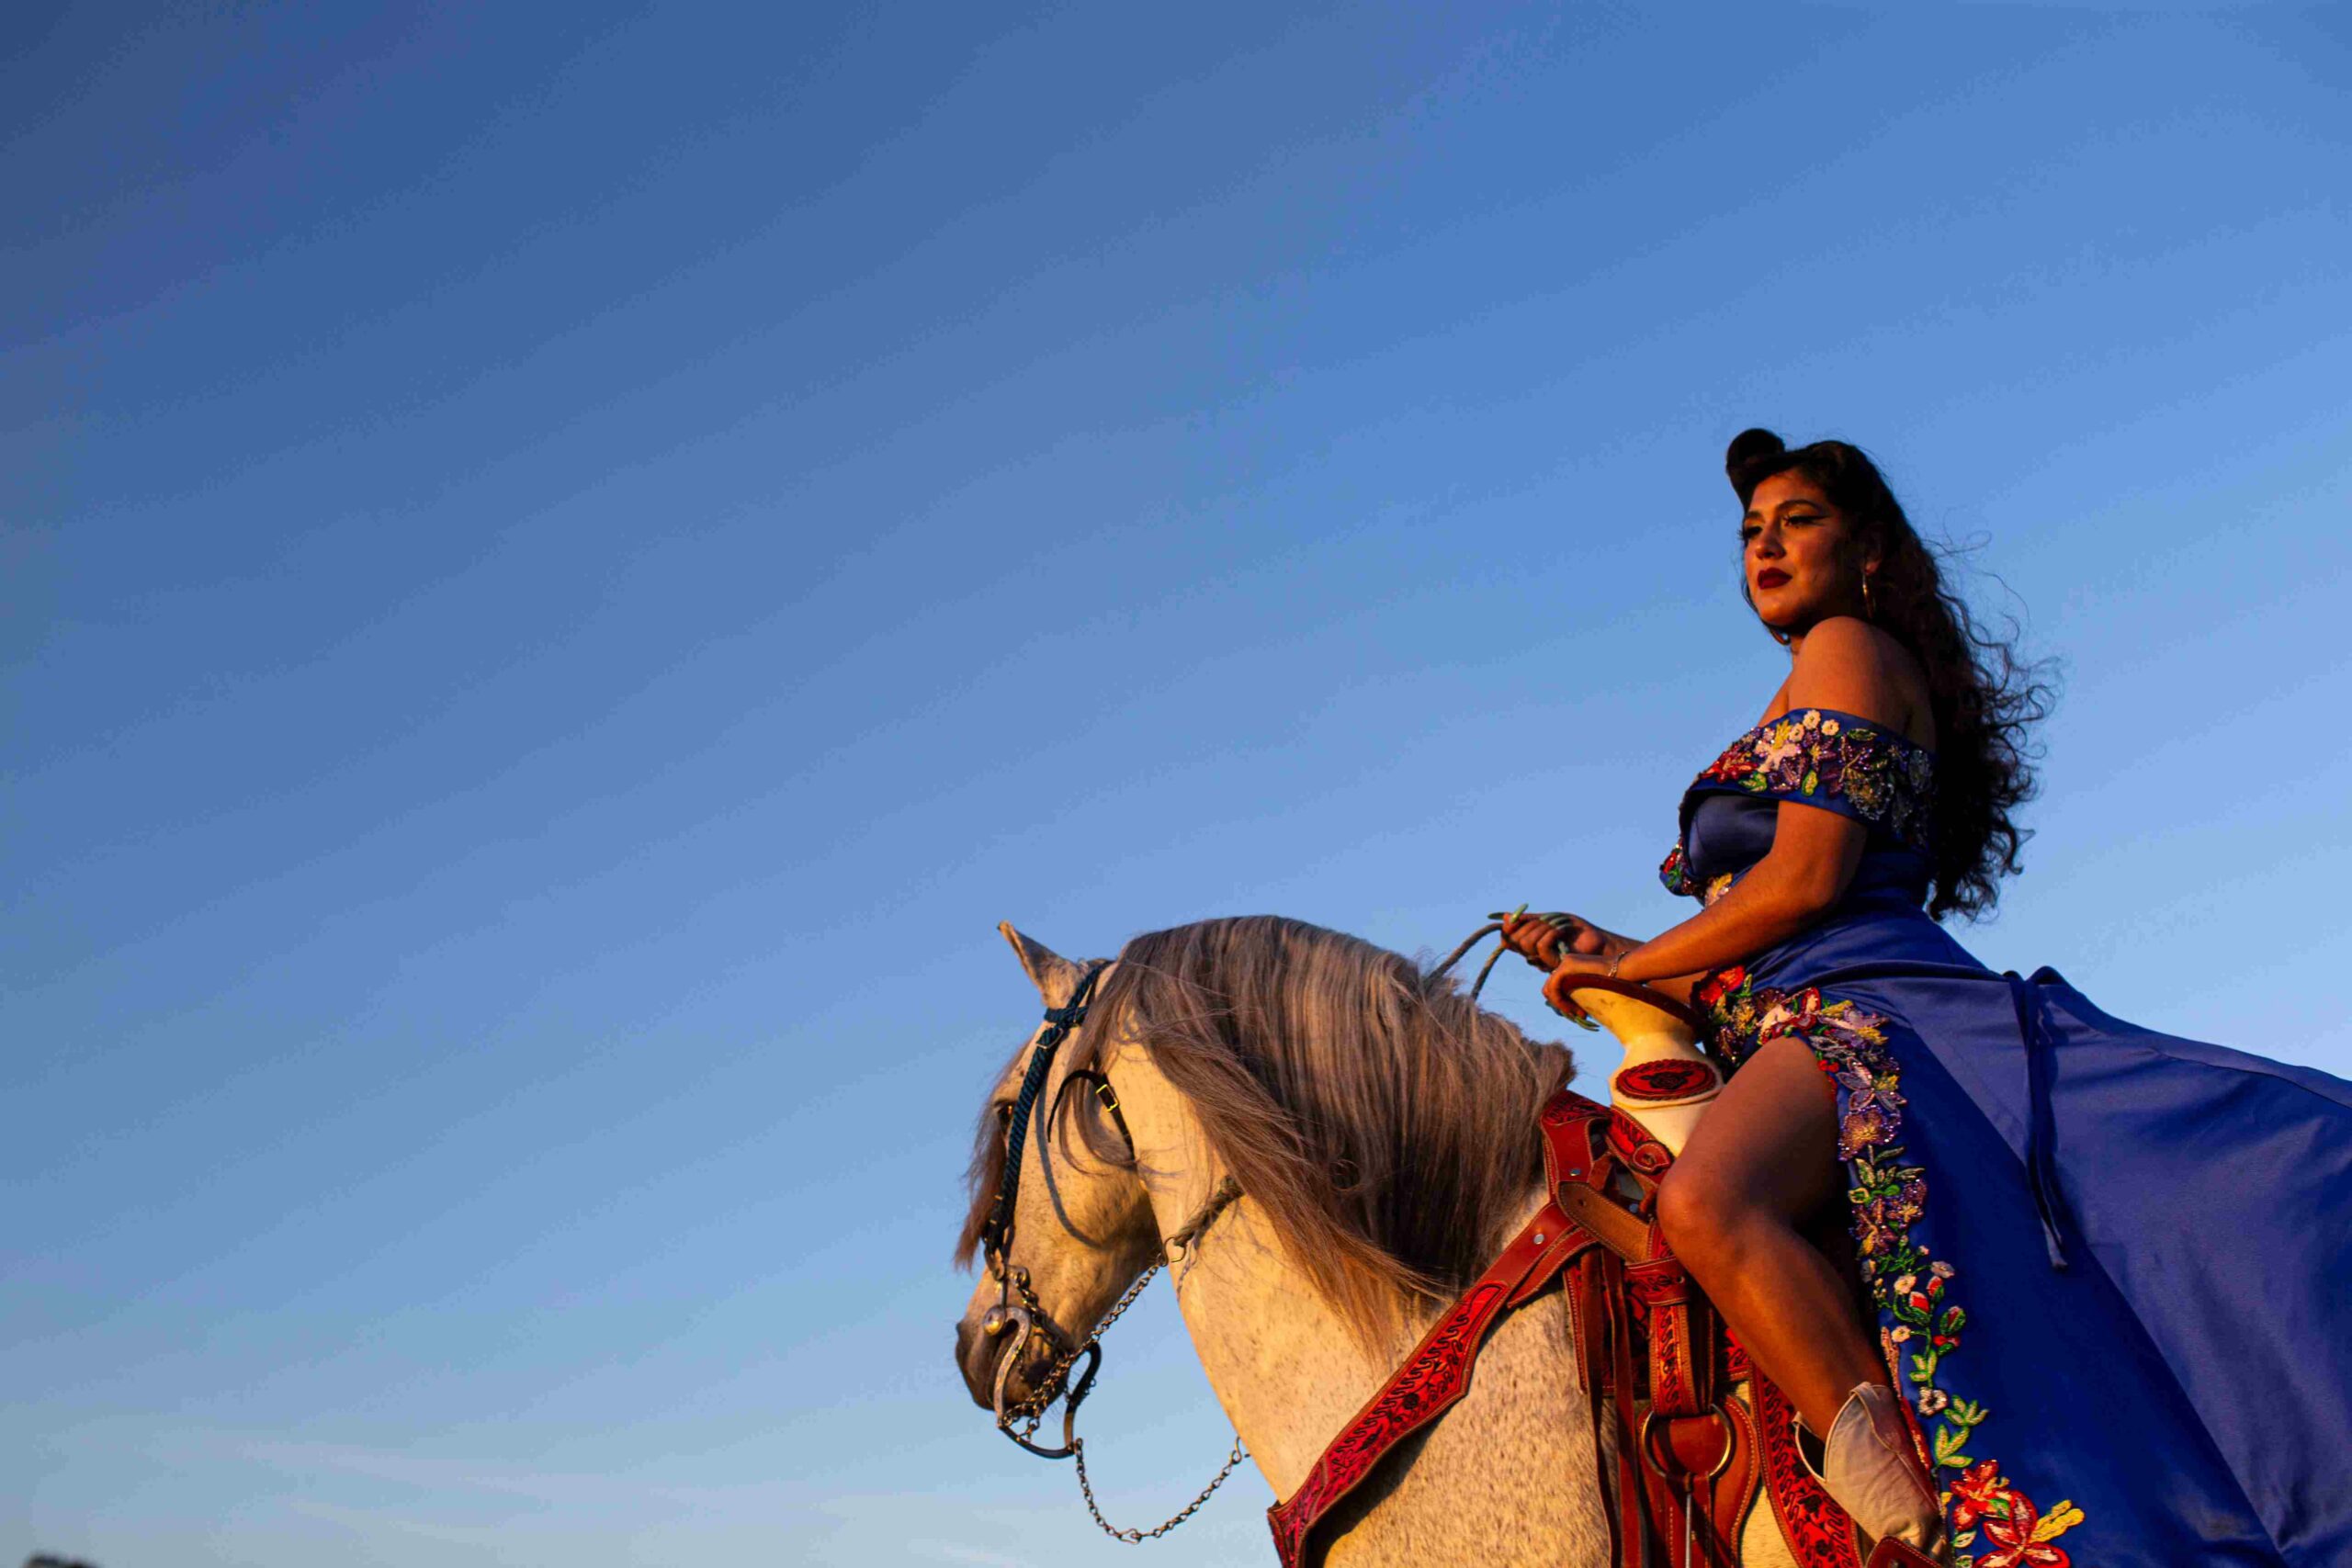 A woman in a dress on a horse with bright blue sky.